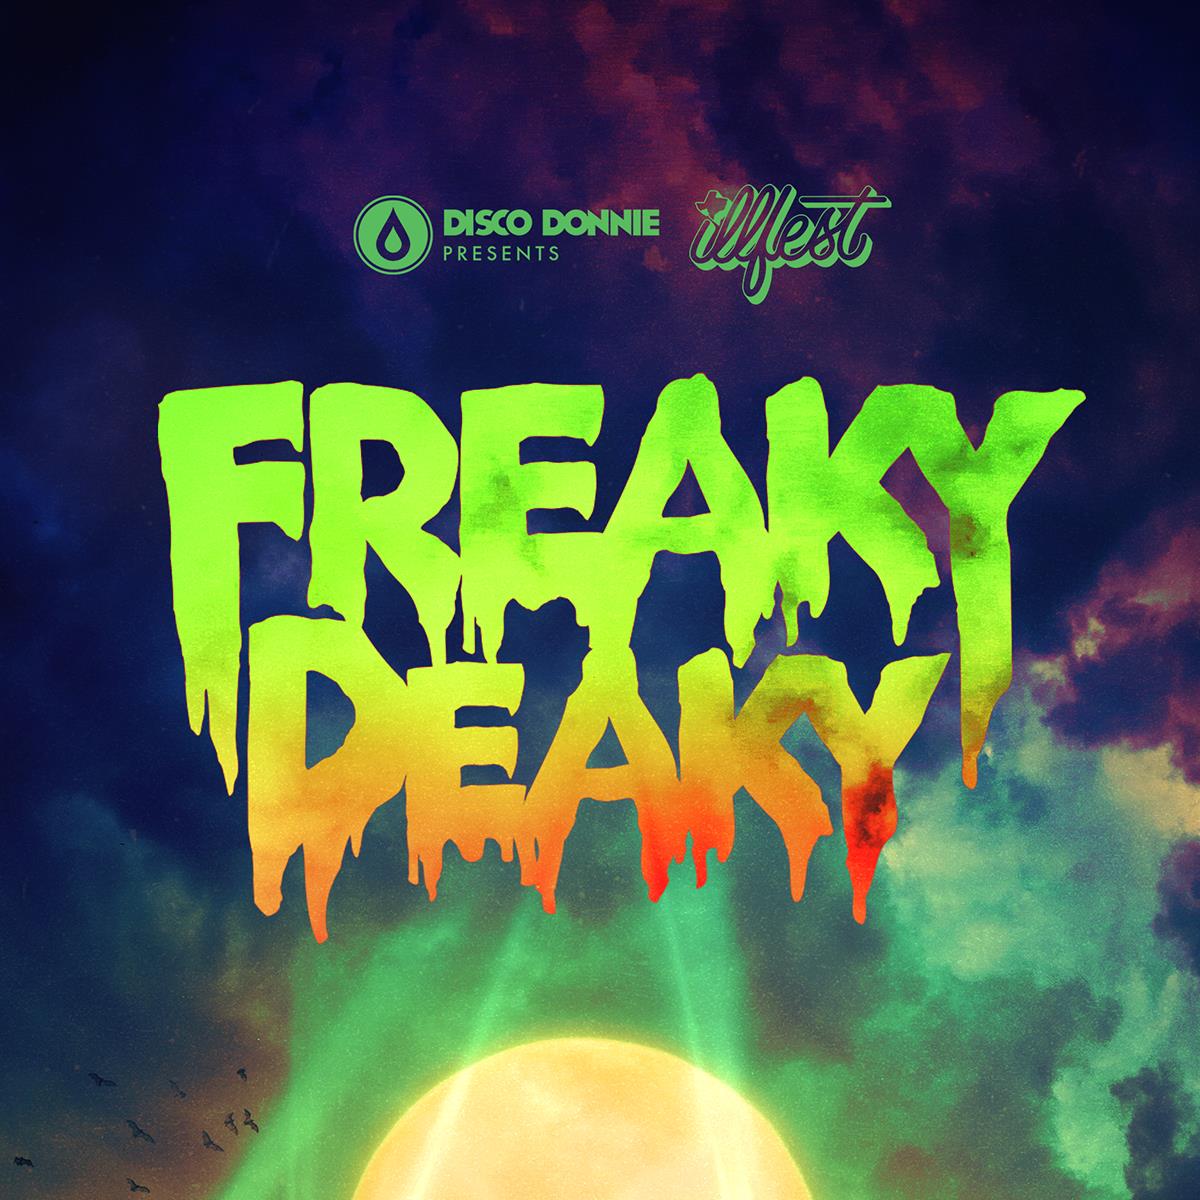 Buy Tickets to Freaky Deaky 2023 in Austin on Oct 28, 2023 - Oct 29,2023